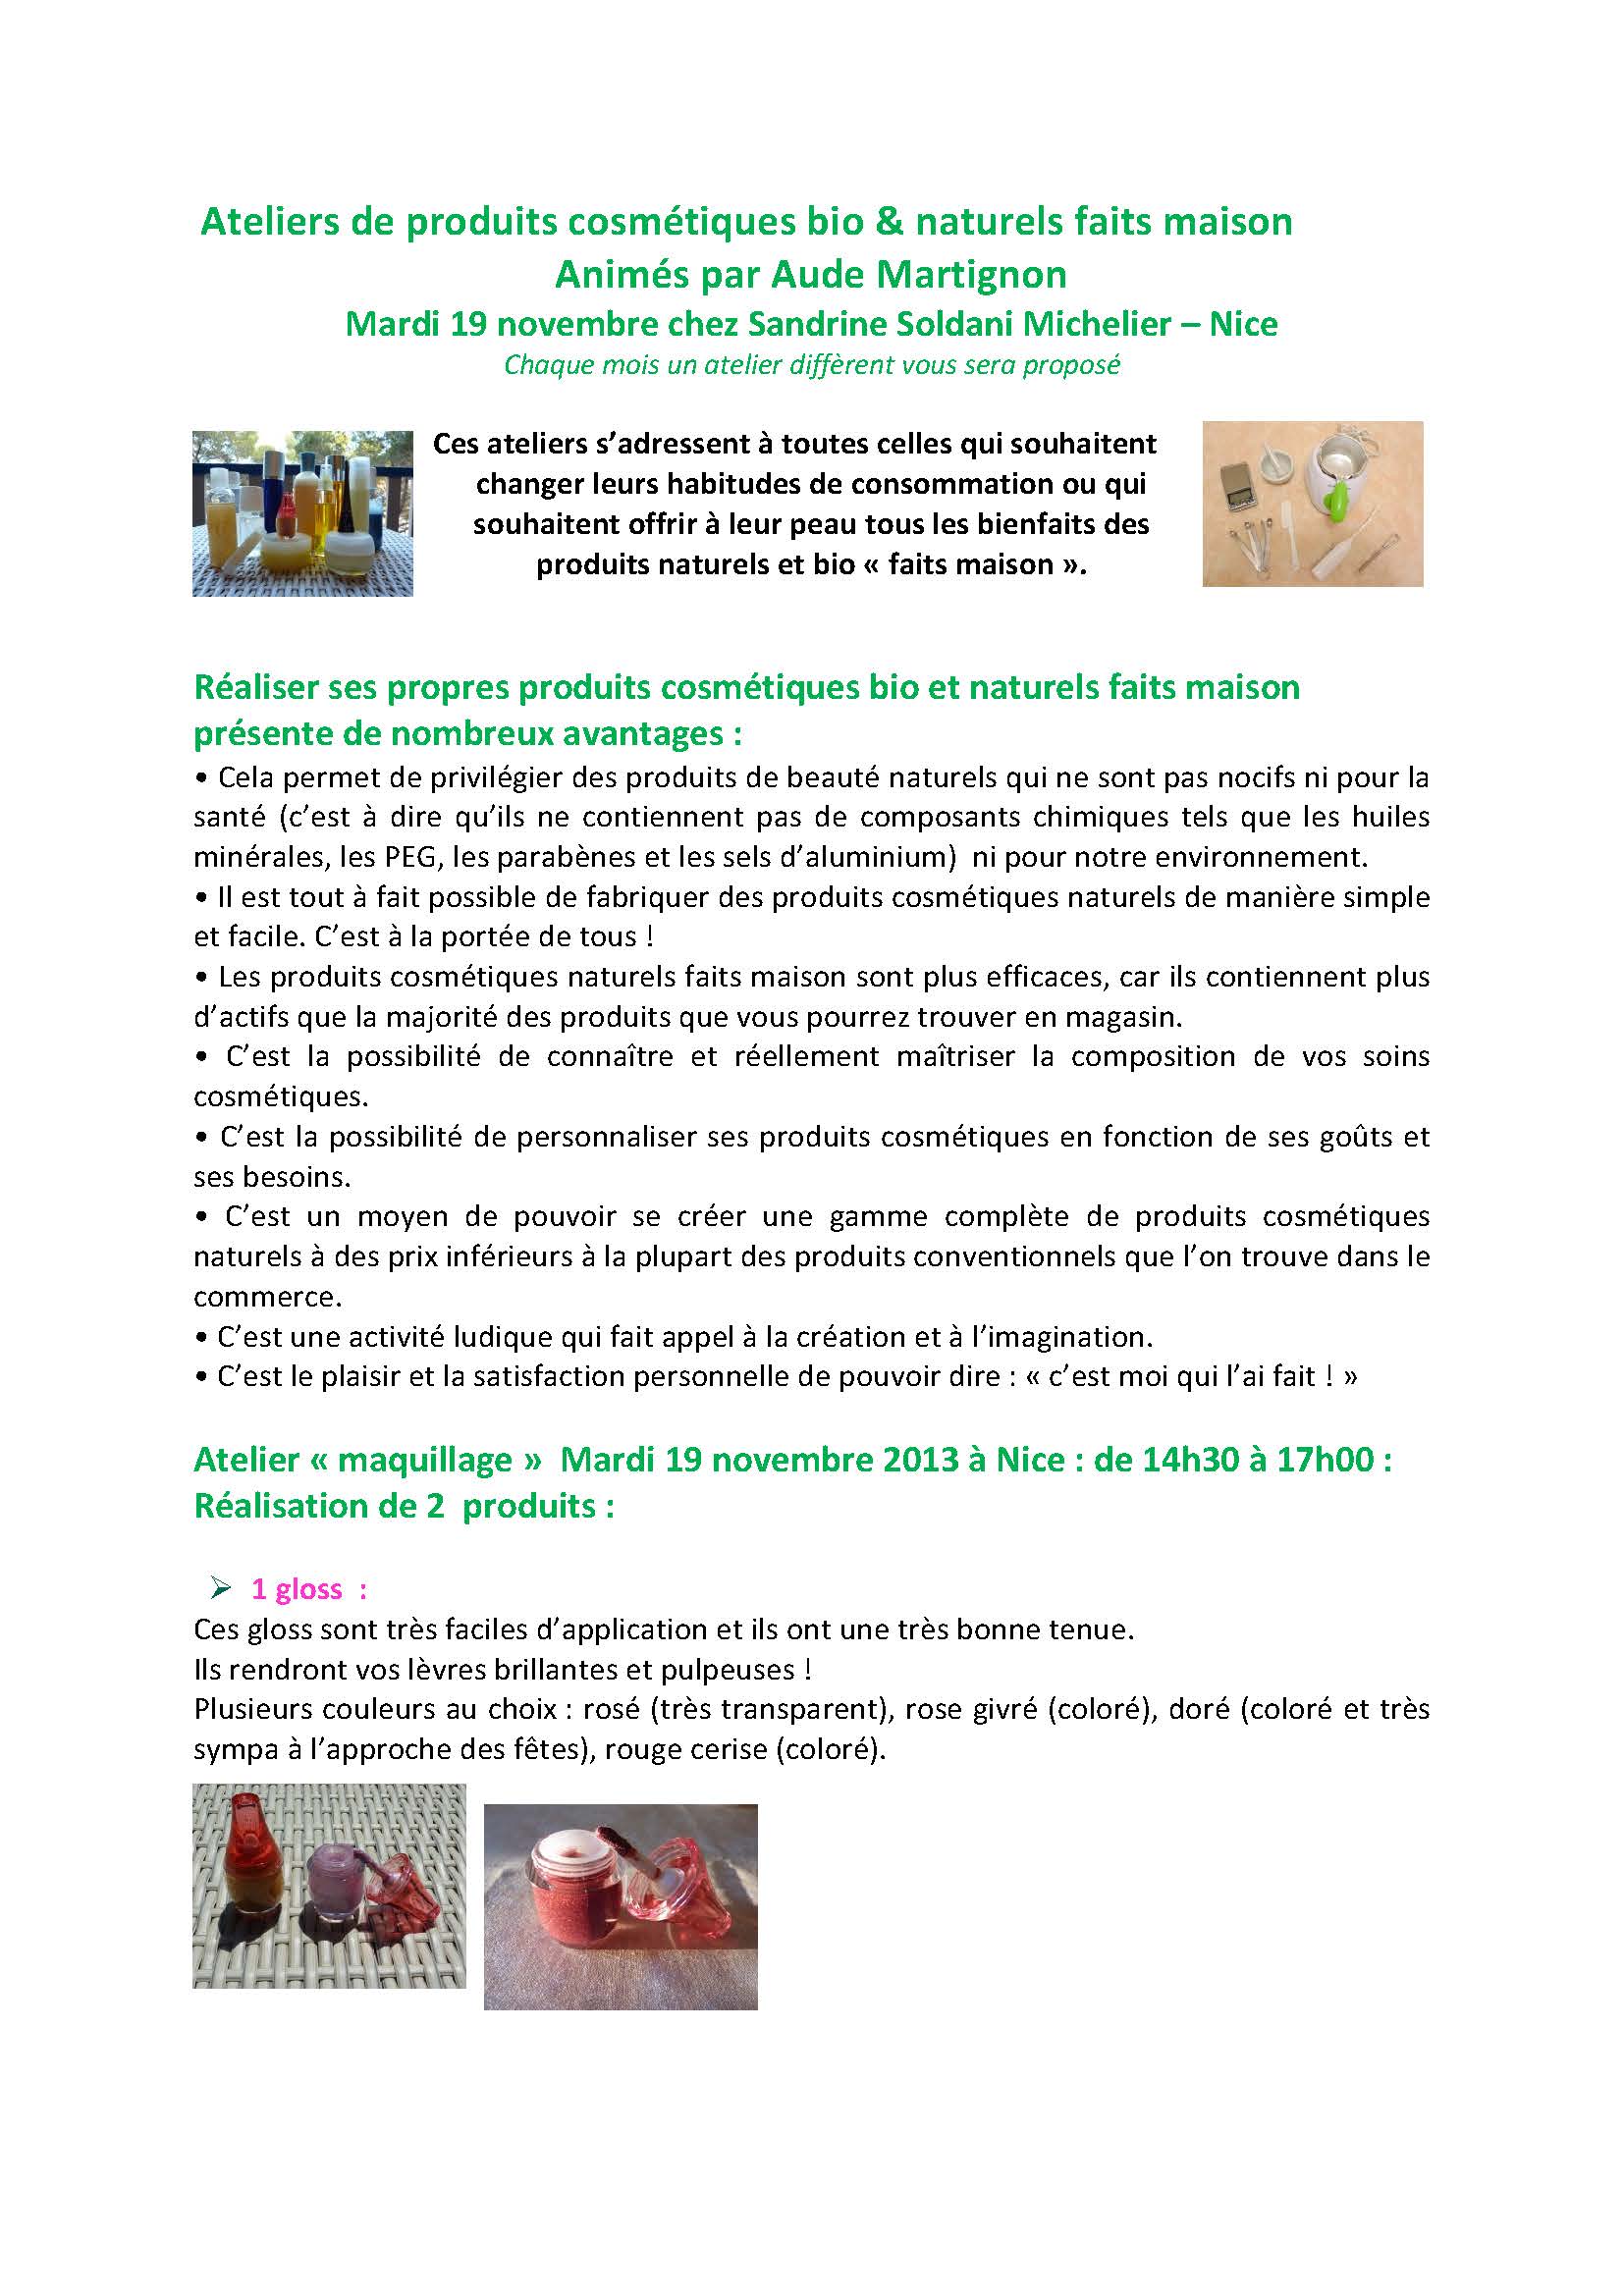 atelier-glosseyeliner-image Page 1